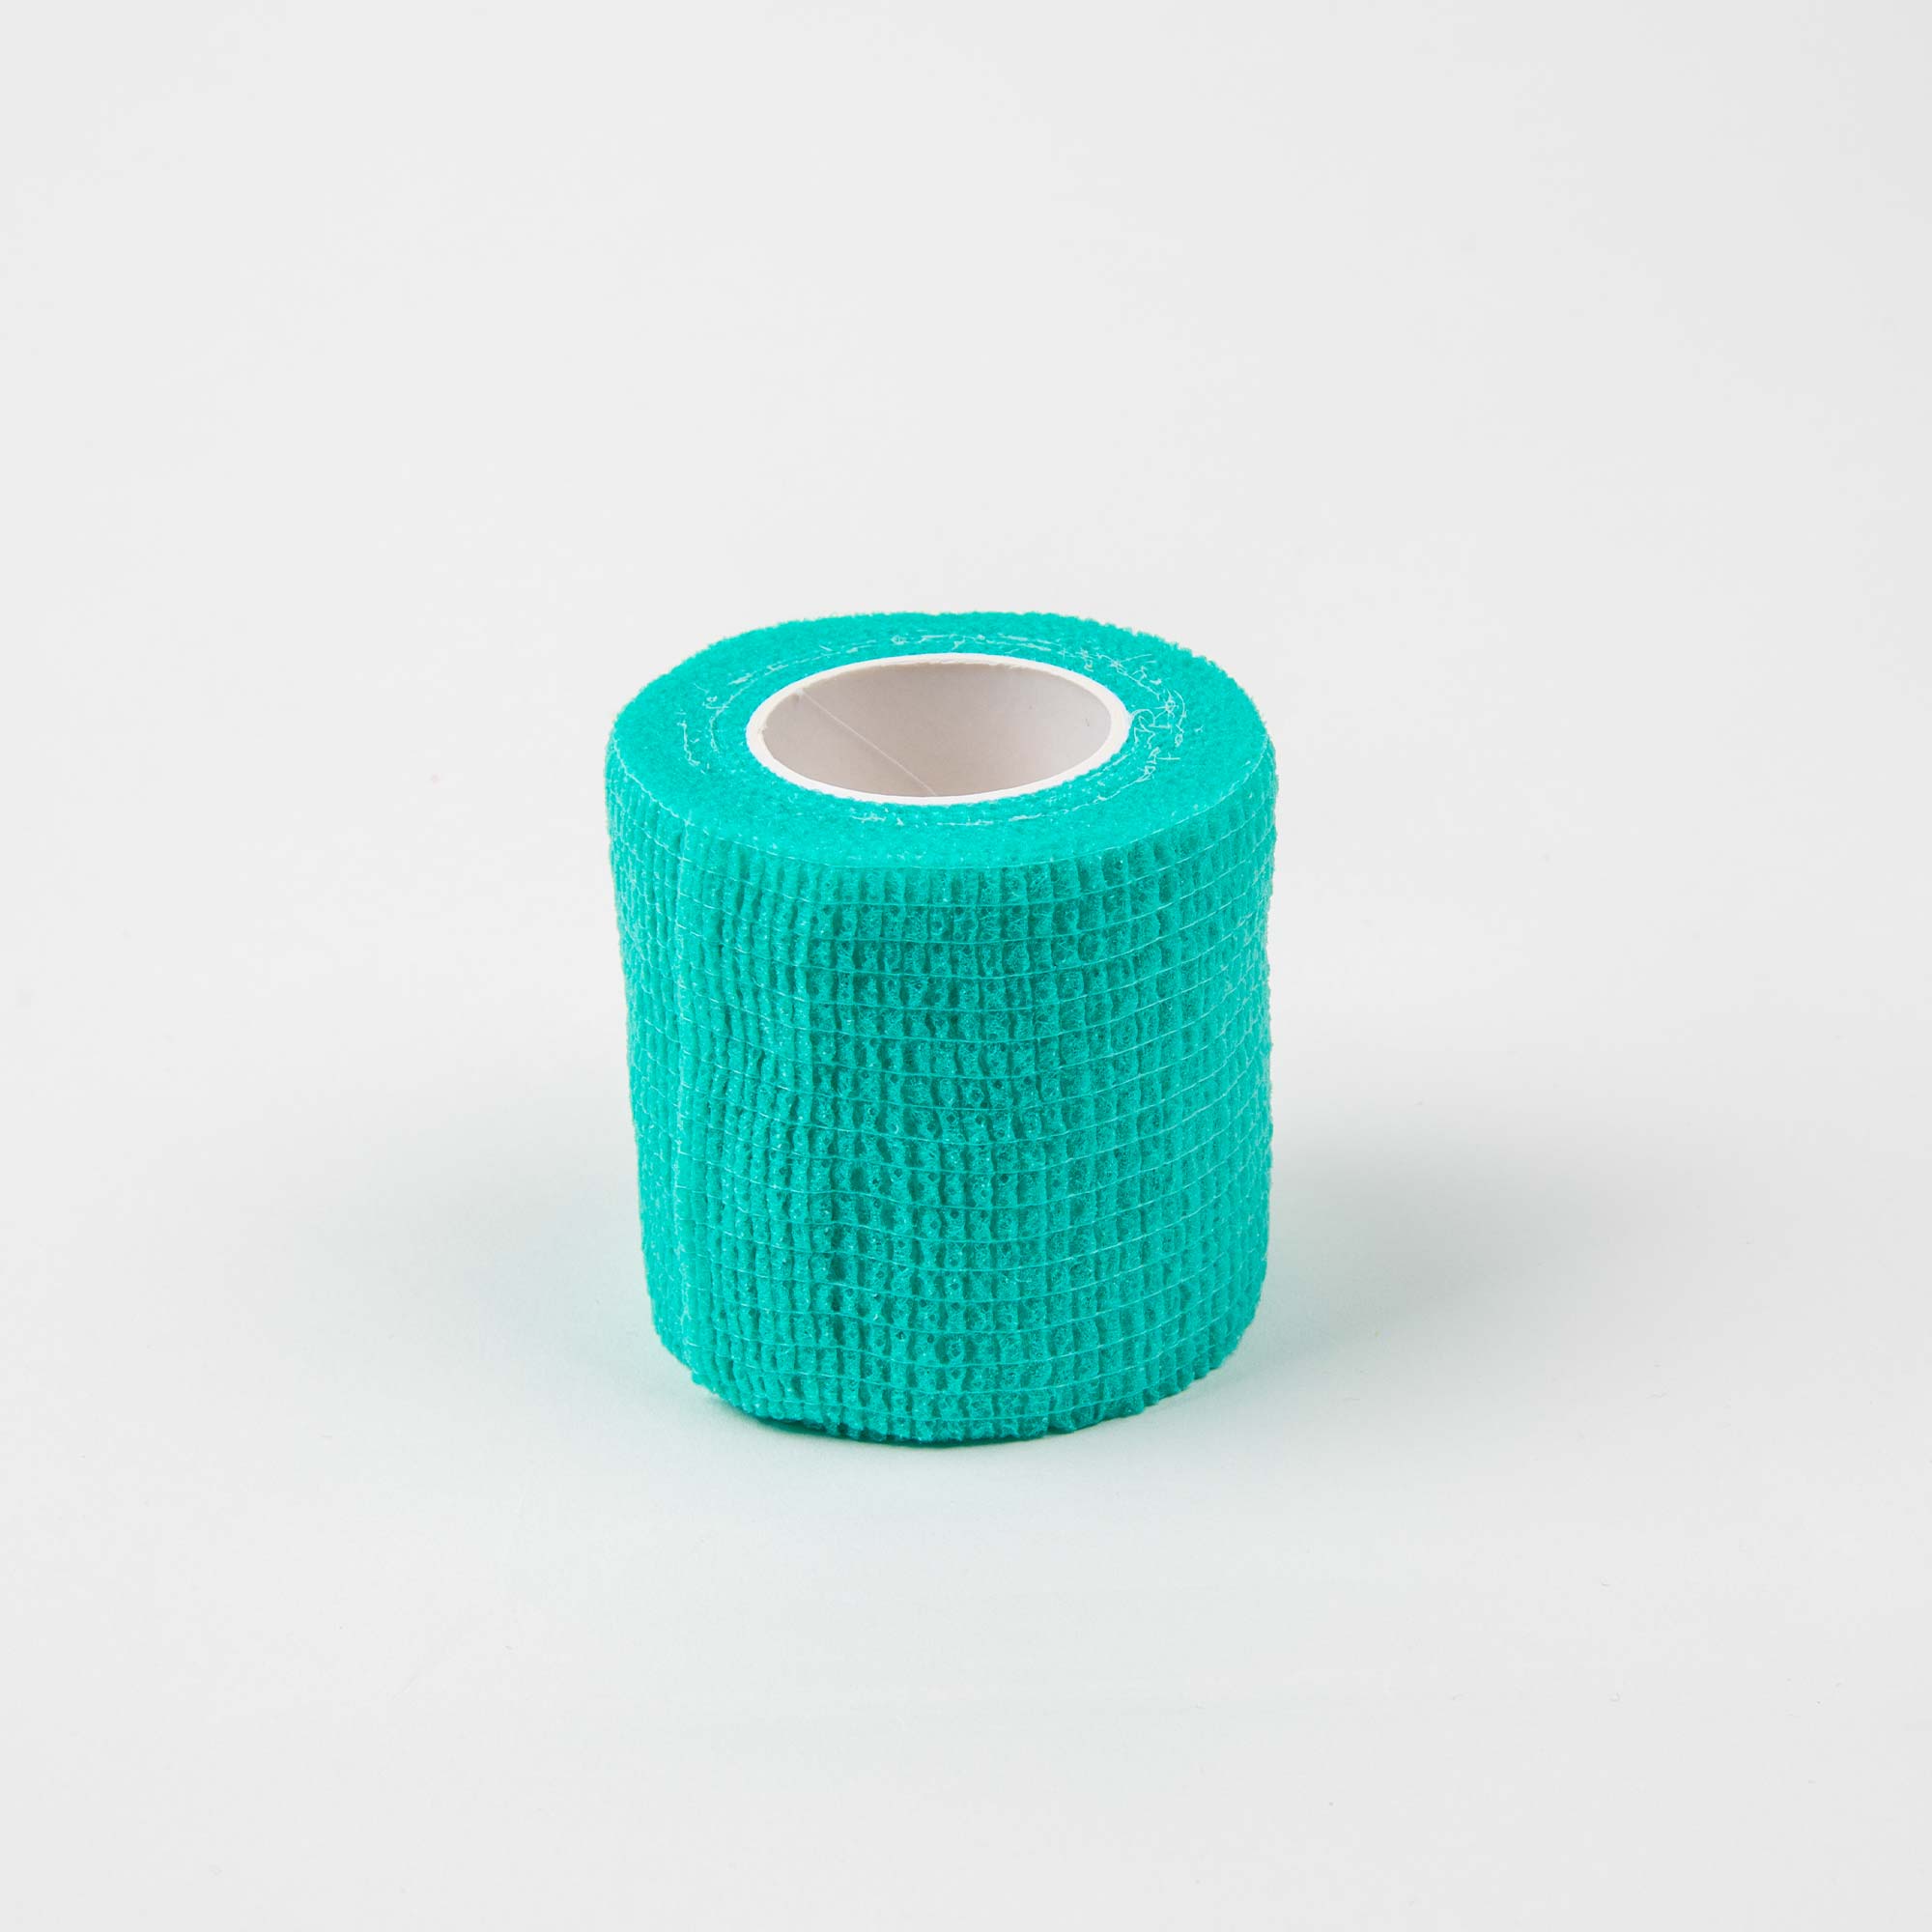 Self-adhesive bandage for dogs